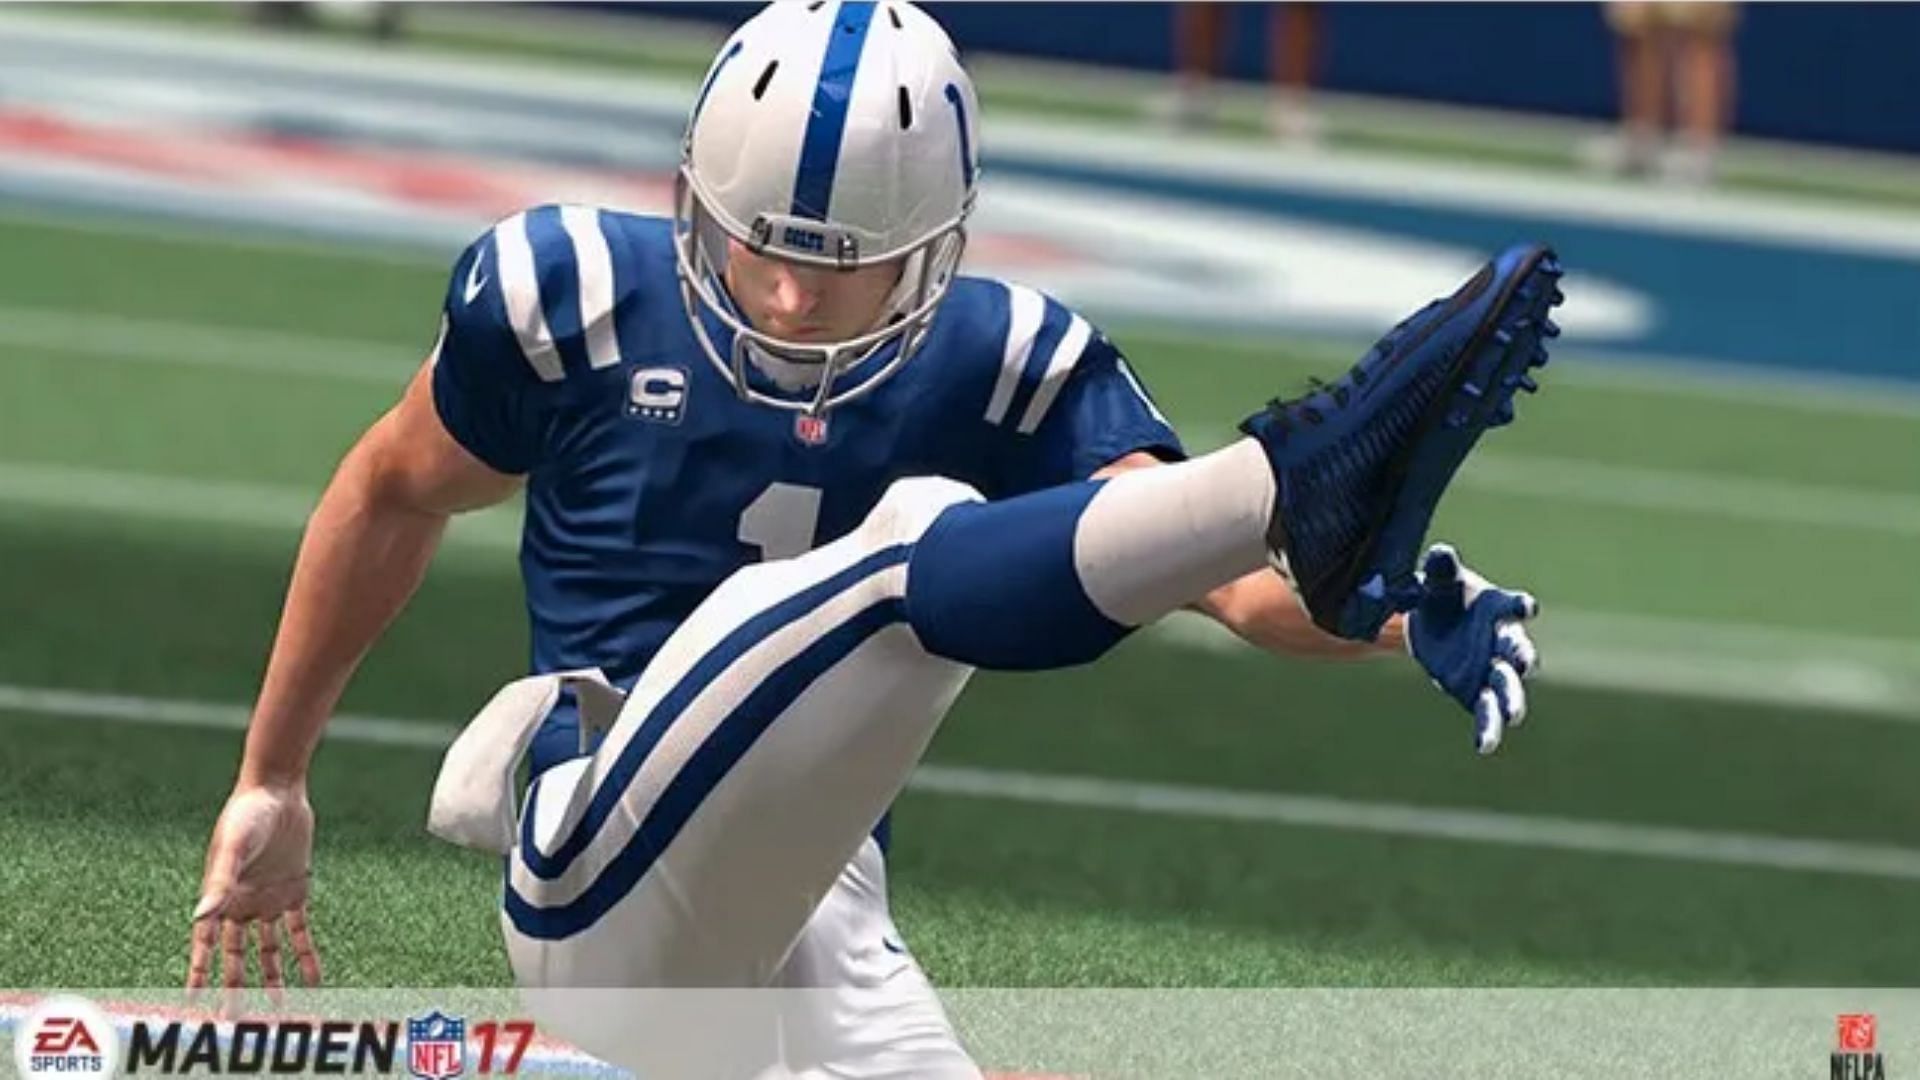 Pat McAfee and Madden - a love story better than Twilight